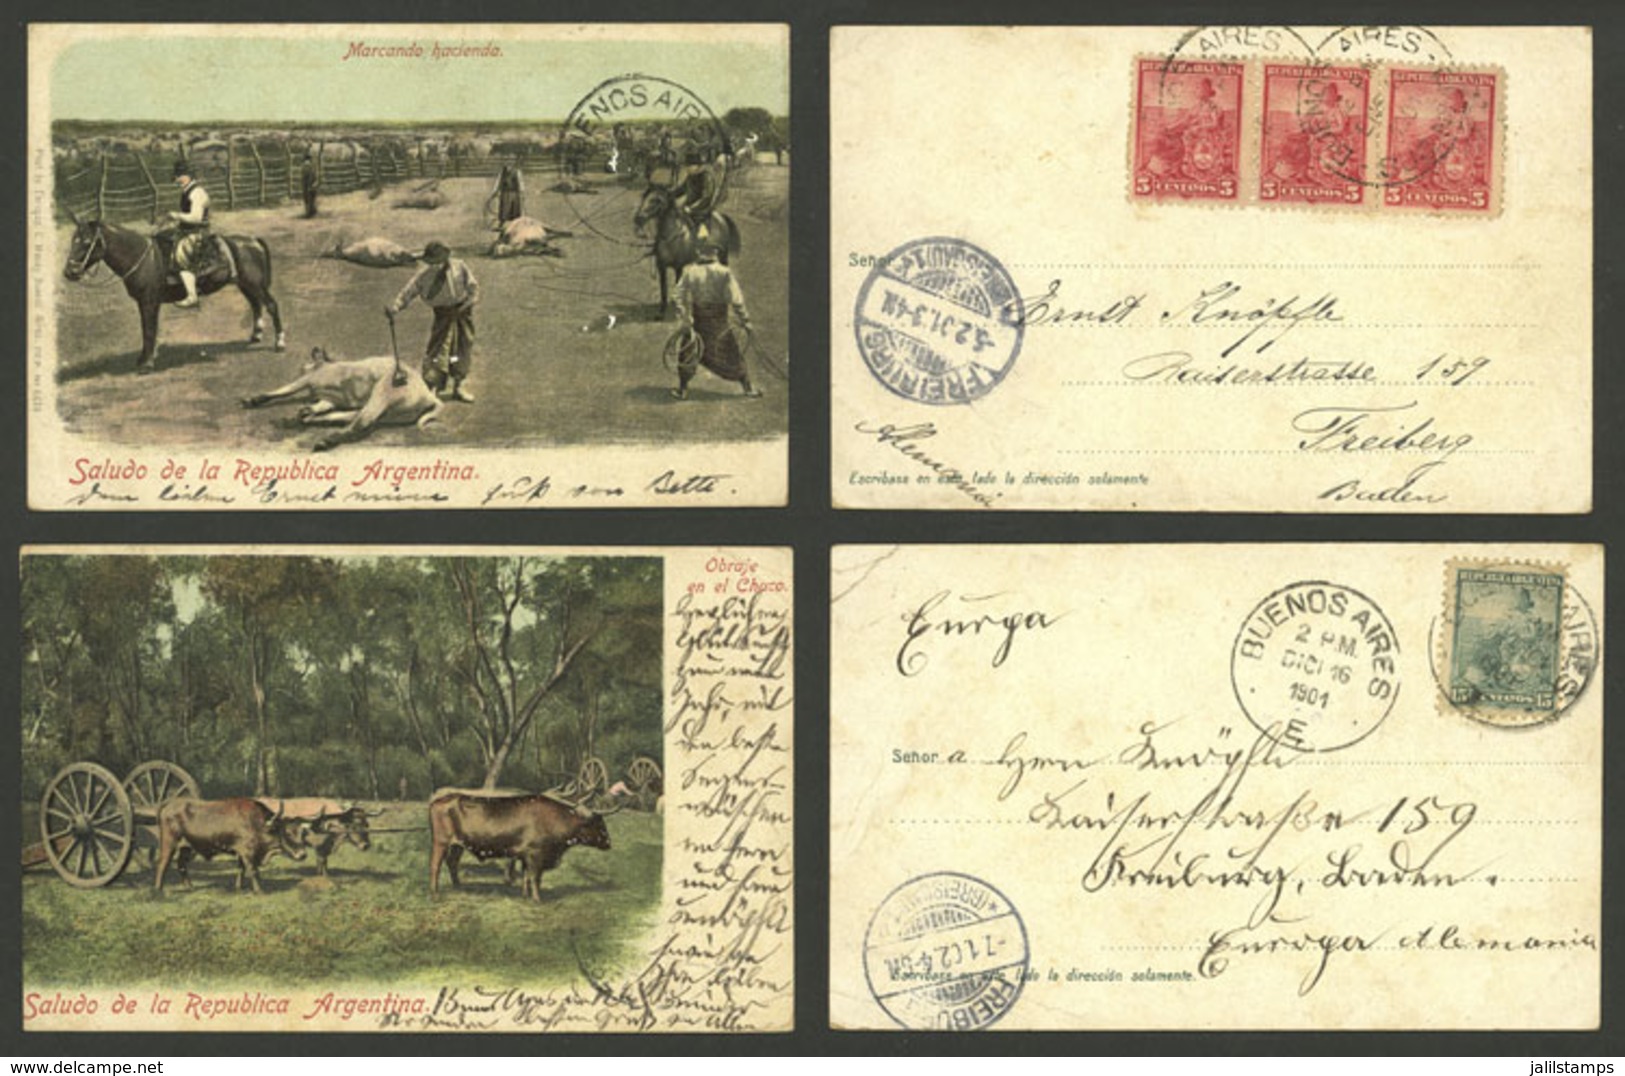 ARGENTINA: CATTLE: Marking Cows And Chaco Rural Scene, Both Edited By Enrique Moody And Sent To Germany In 1901, Very Ni - Argentine